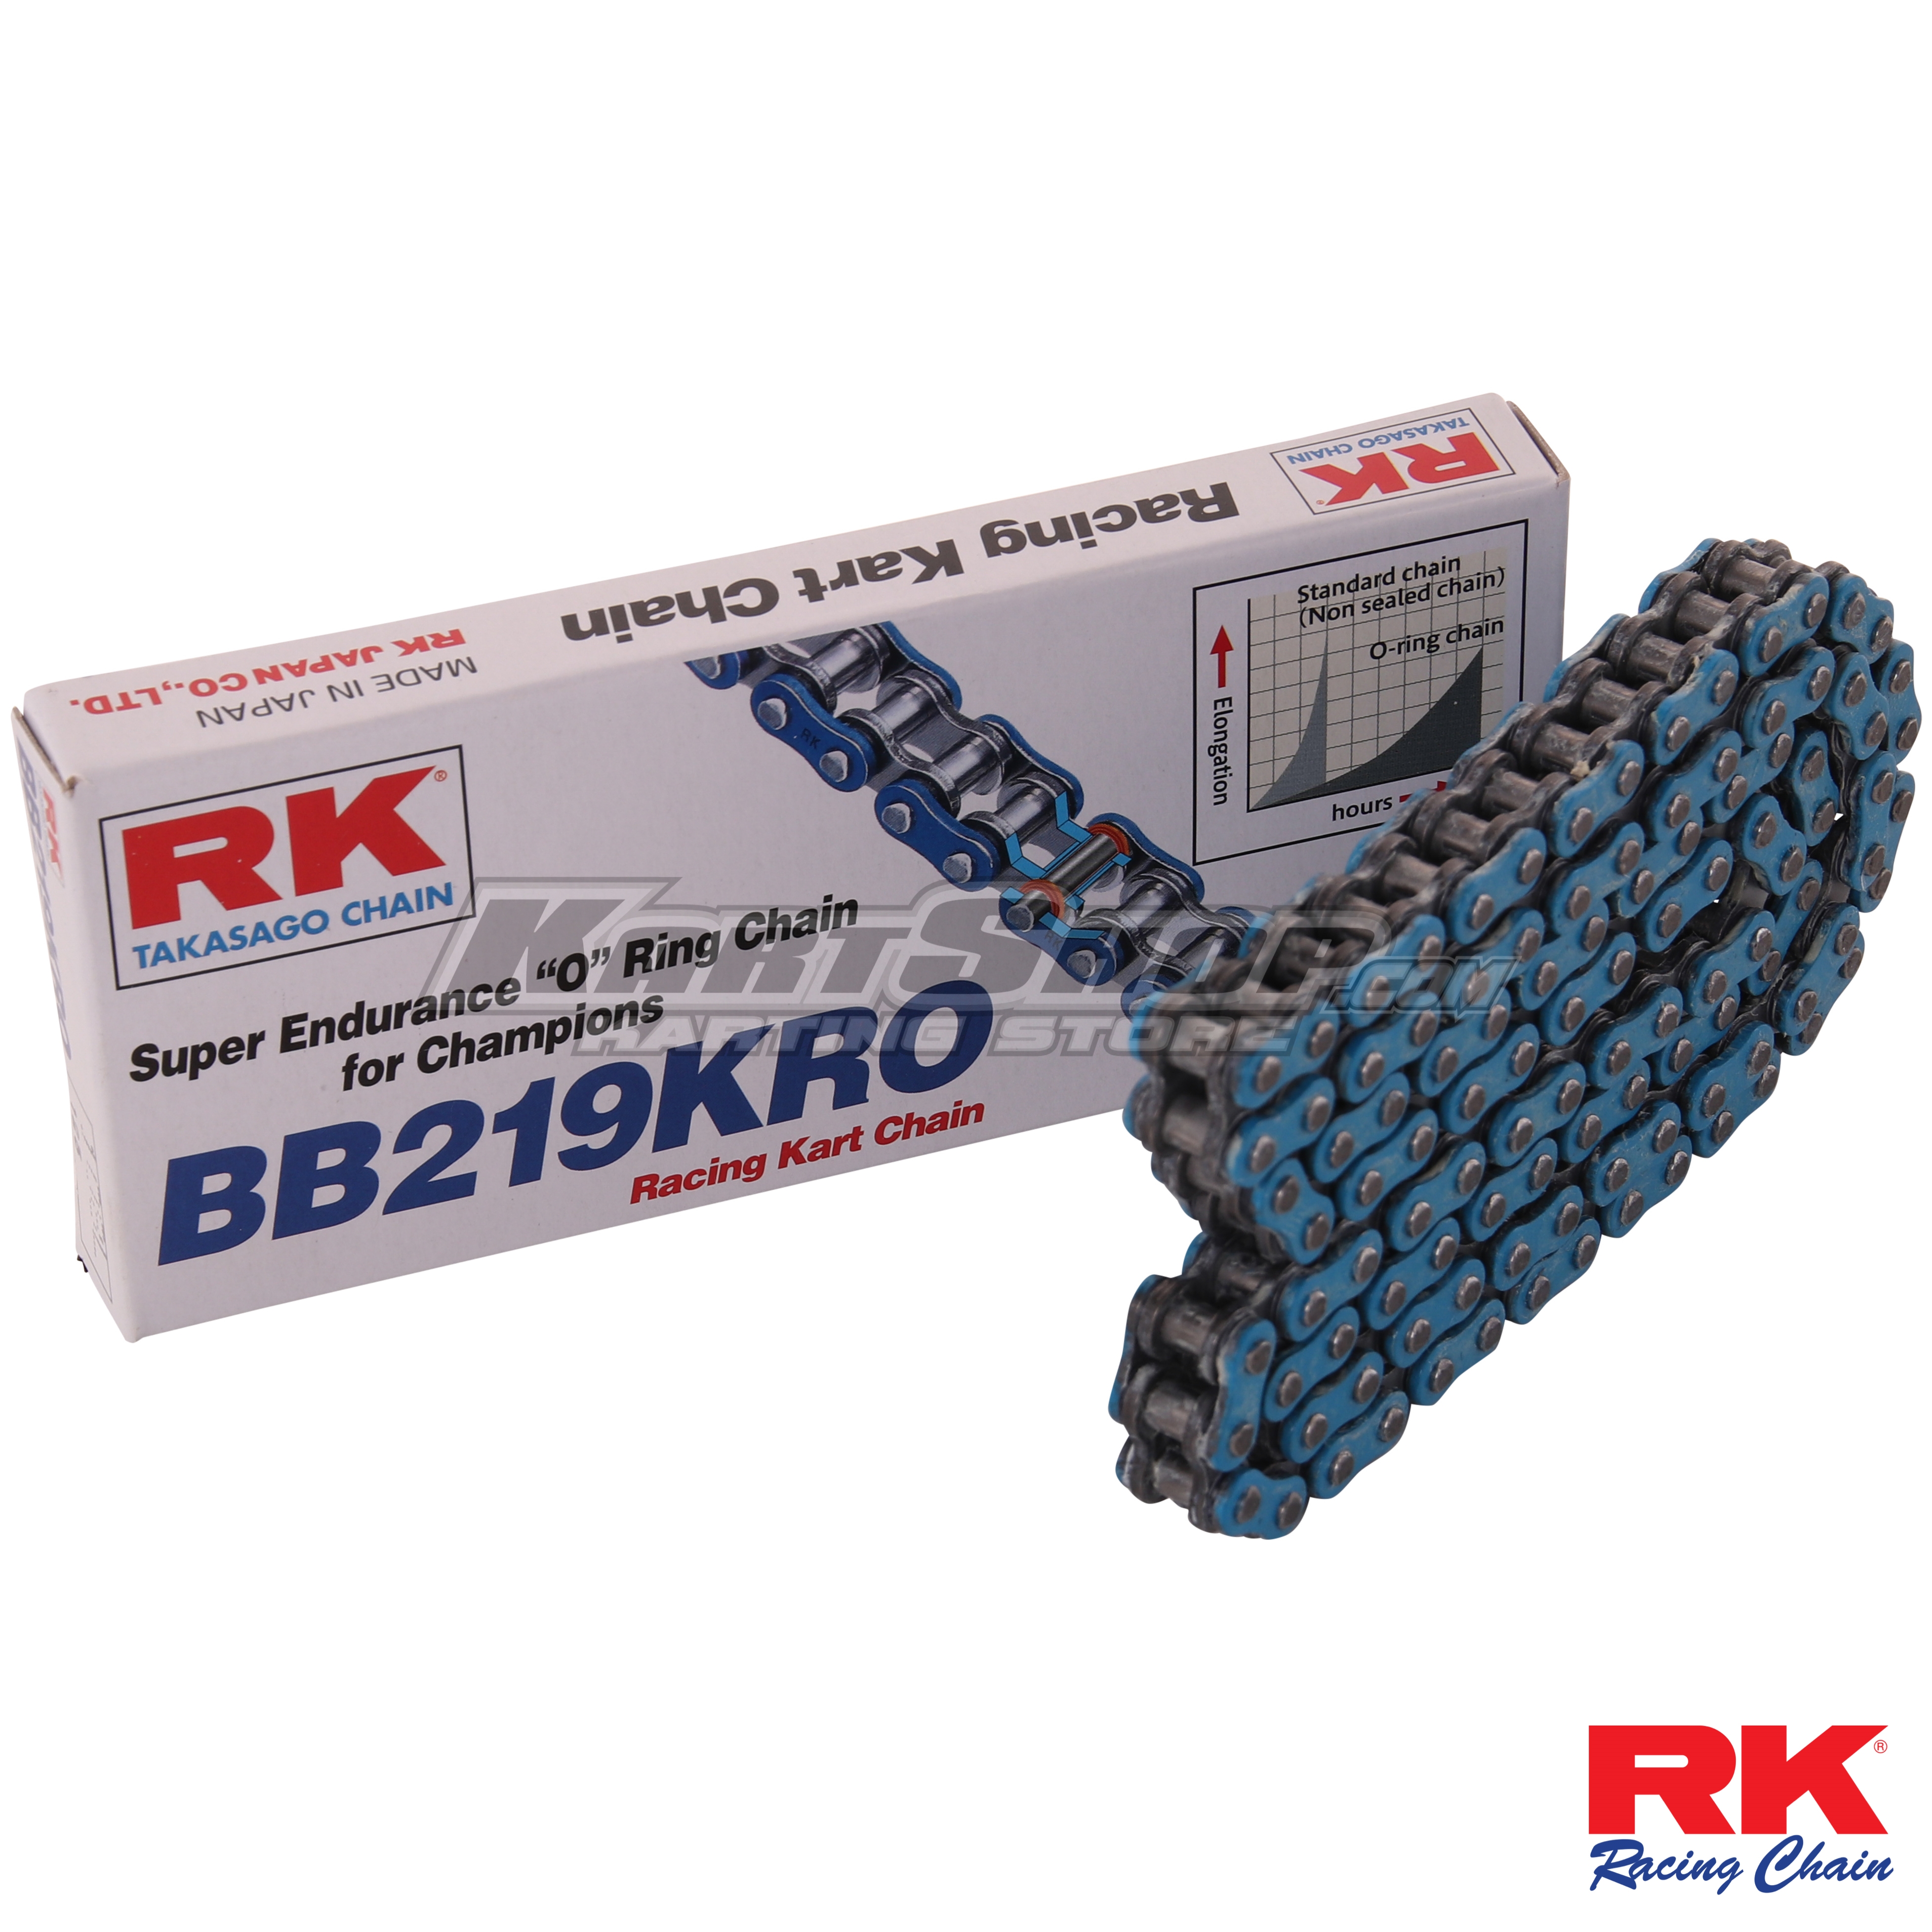 RK o-ring chain with 106 links